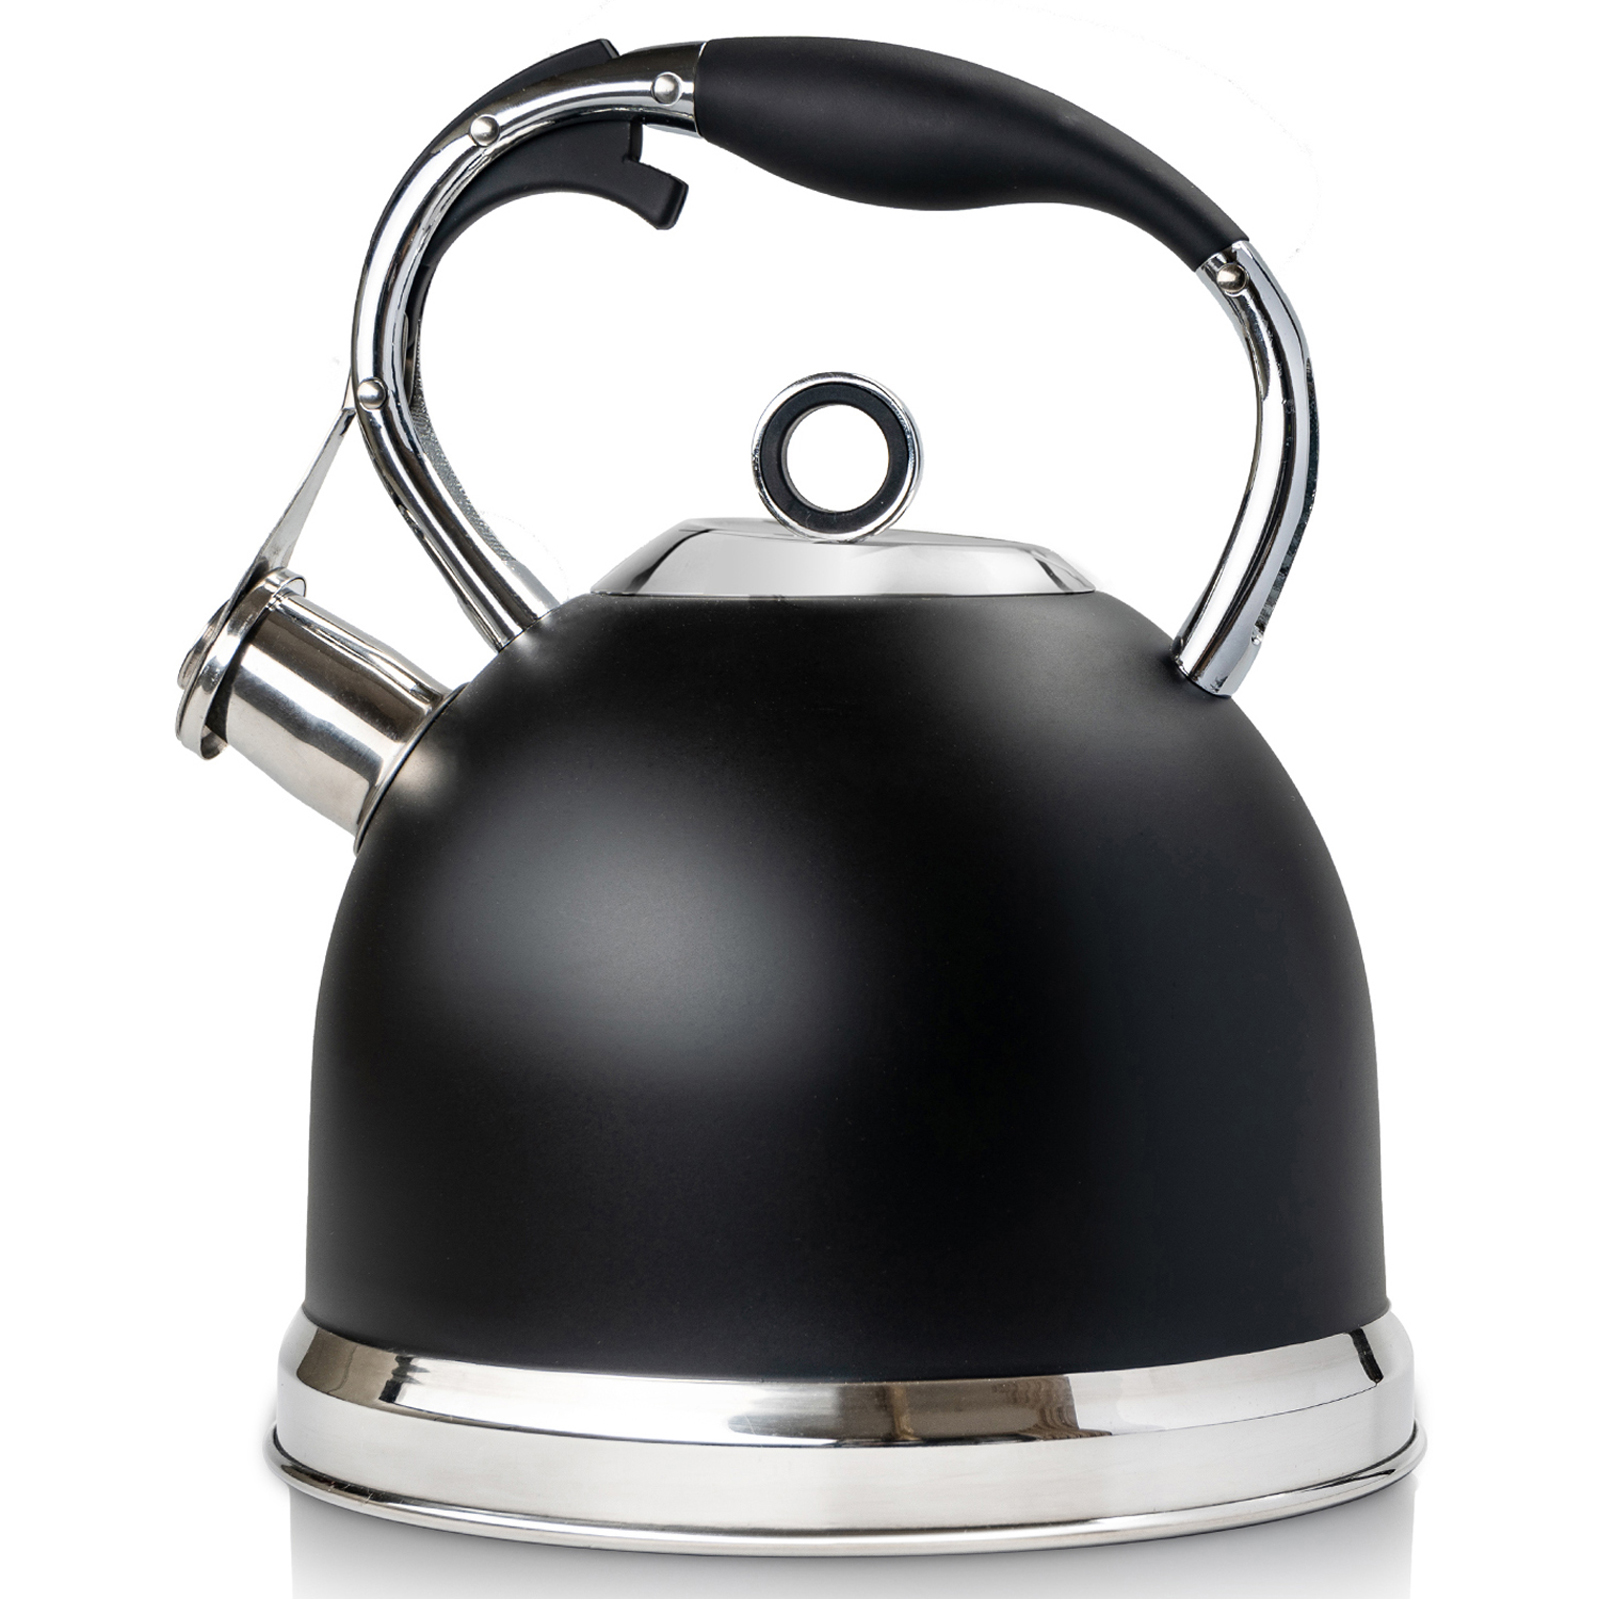 Tea Kettle for Stovetop, 3 Quart Loud Whistling Teapot with Cool Grip Ergonomic Handle Food Grade Stainless Steel Teakettle for Tea, Coffee (Black) - image 1 of 7